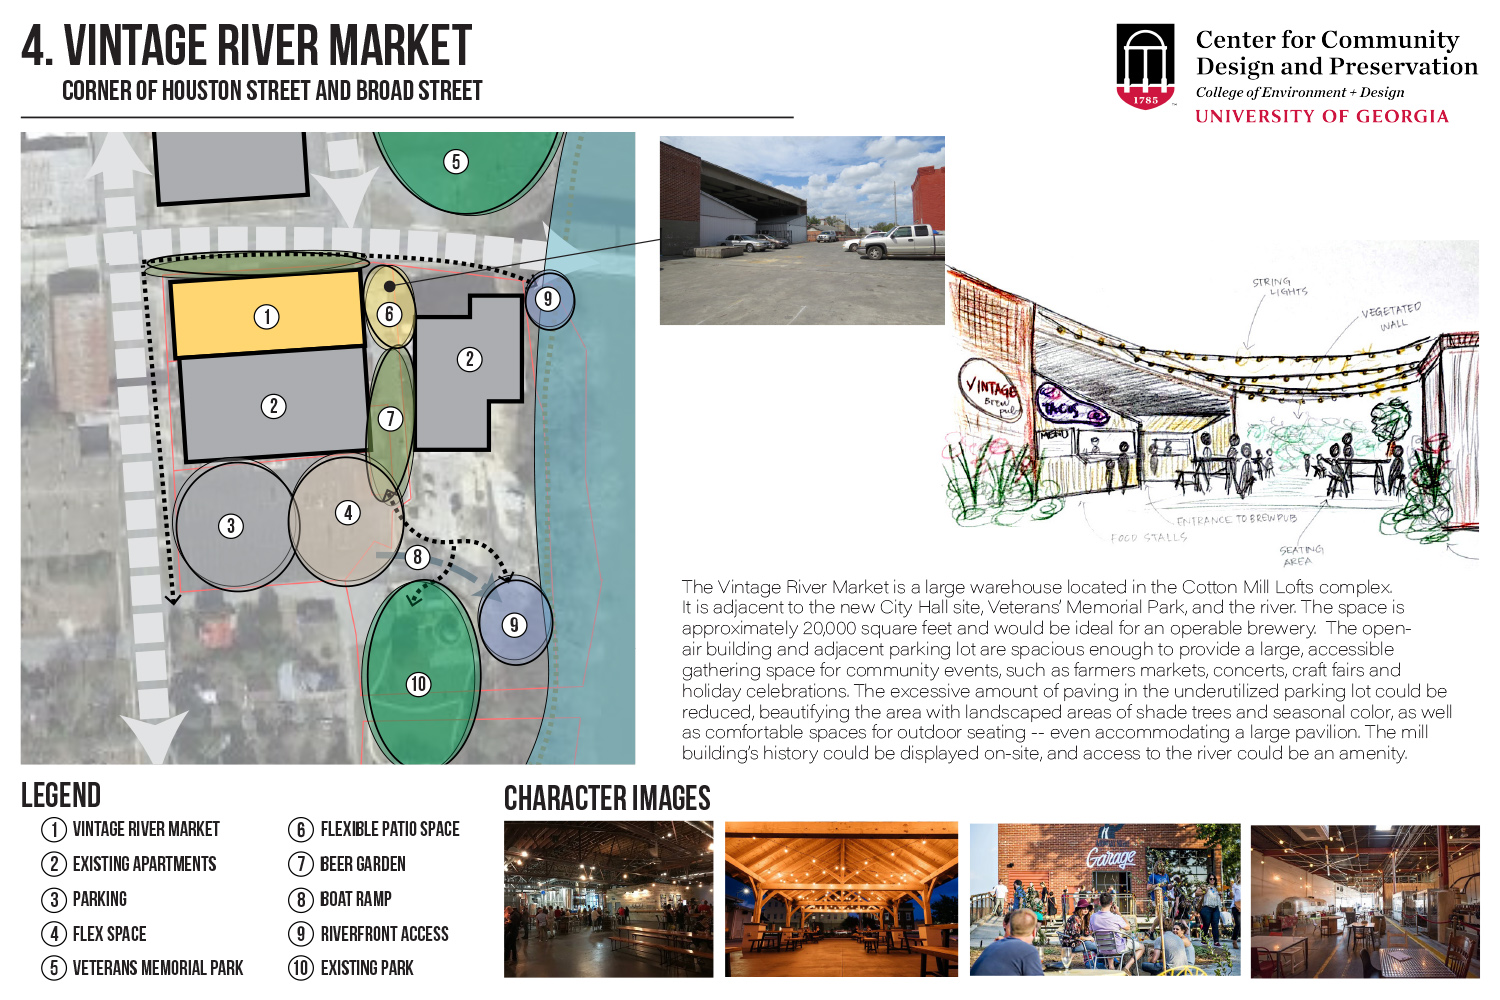 The Vintage River Market is a large warehouse located in the C otton Mill Lofts complex . It is adjacent to the new C ity Hall site, Veterans’ Memorial Park , and the river. The space is approximately 20,000 square feet and would be ideal for an operable brewery.  The open-air building and adjacent parking lot are spacious enough to provide a large, accessible gathering space for community events, such as farmers markets, concerts, craft fairs and holiday celebrations. The excessive amount of paving in the underutilized parking lot could be reduced , beautifying the area with landscaped areas of shade trees and seasonal color, as well as comfortable spaces for outdoor seating -- even accommodating a large pavilion. The mill building’s history could be displayed on-site, and access to the river could be an amenity. 